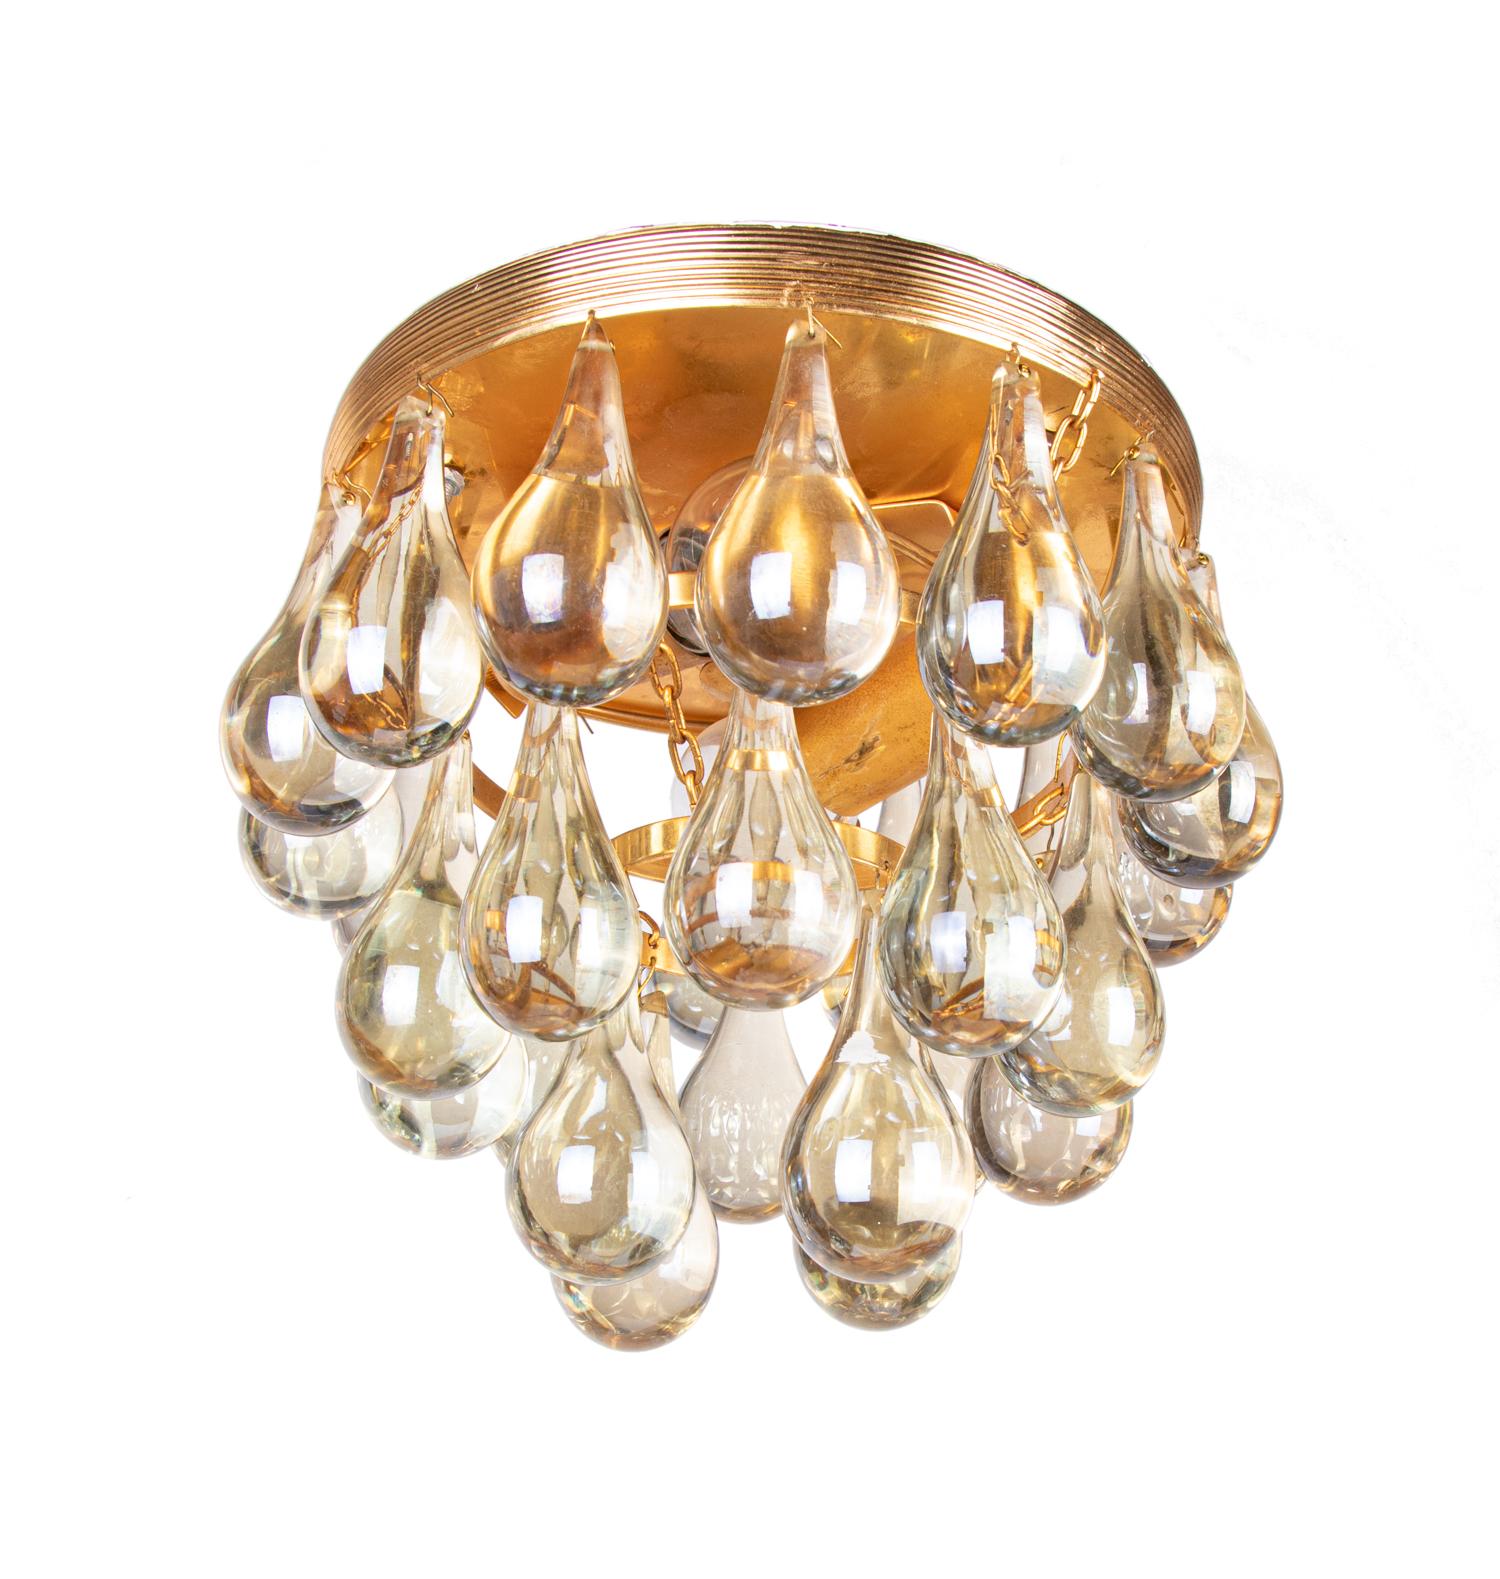 Small flush mount chandelier with a gold-plated brass frame and Murano glass teardrops. These lamps have an incomparable unique character. A touch of luxury fills the room. 
Manufacturer: Palwa, Palme & Walter, Germany, 1960s. 
Measures: diameter